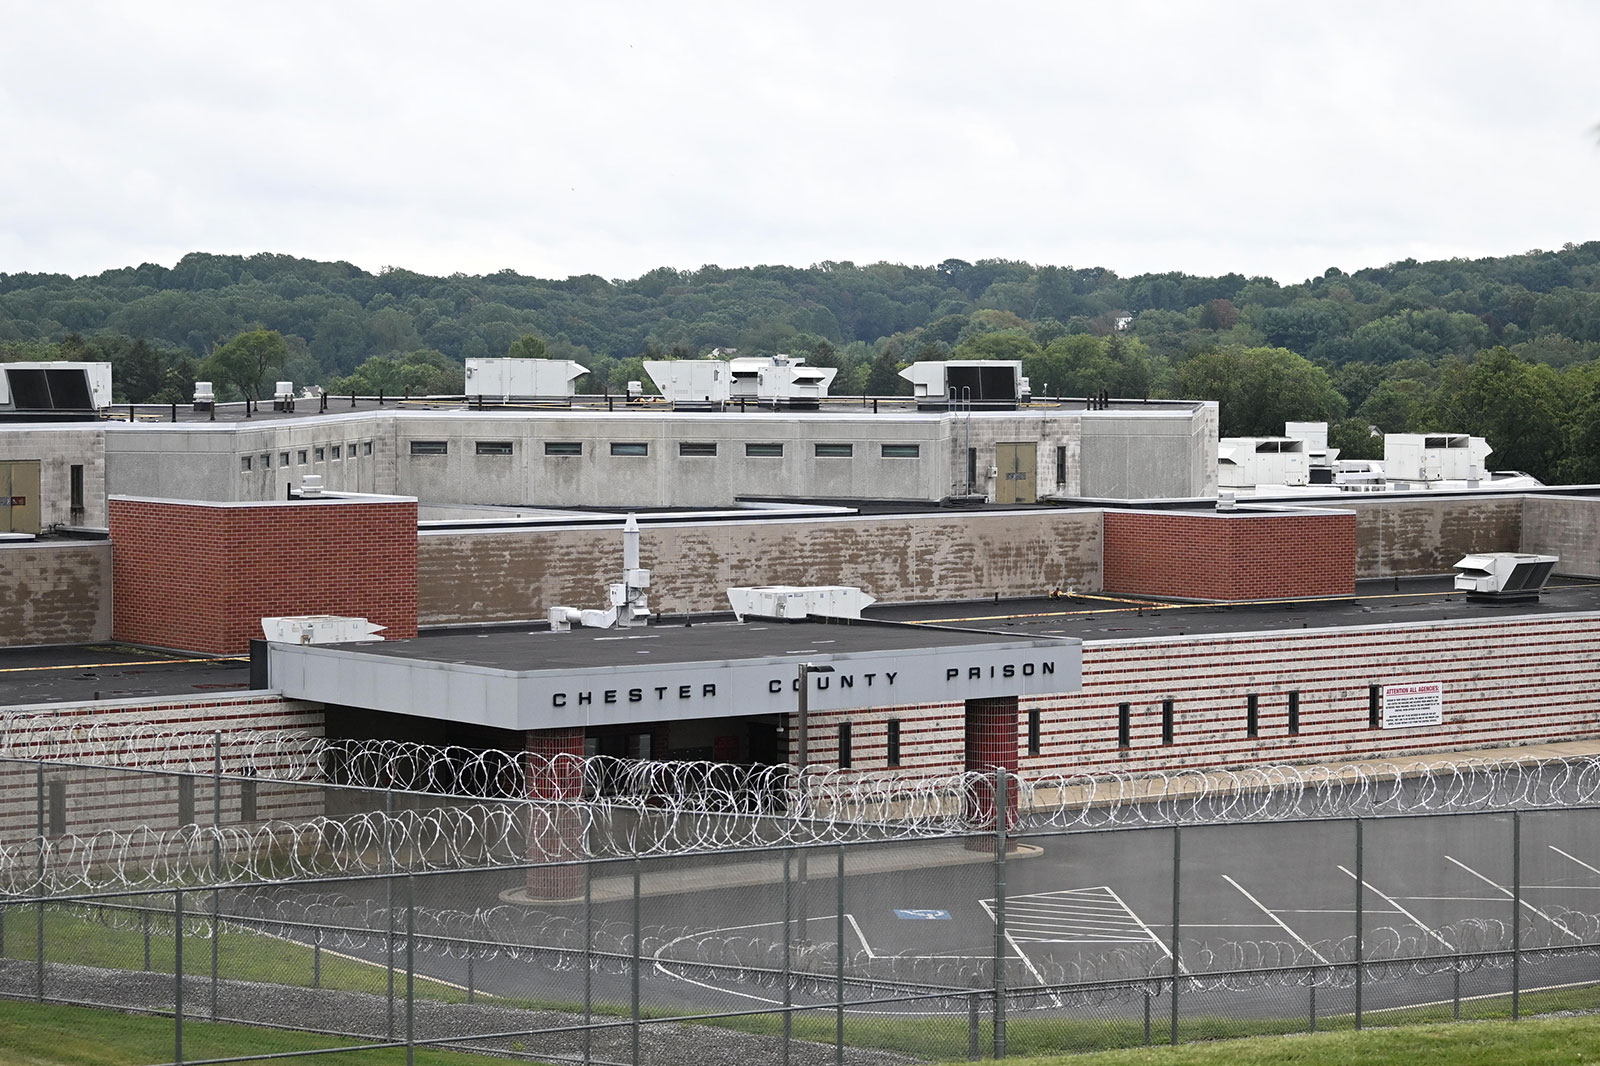 Prison officials "have a lot of work to do" in making sure facility is